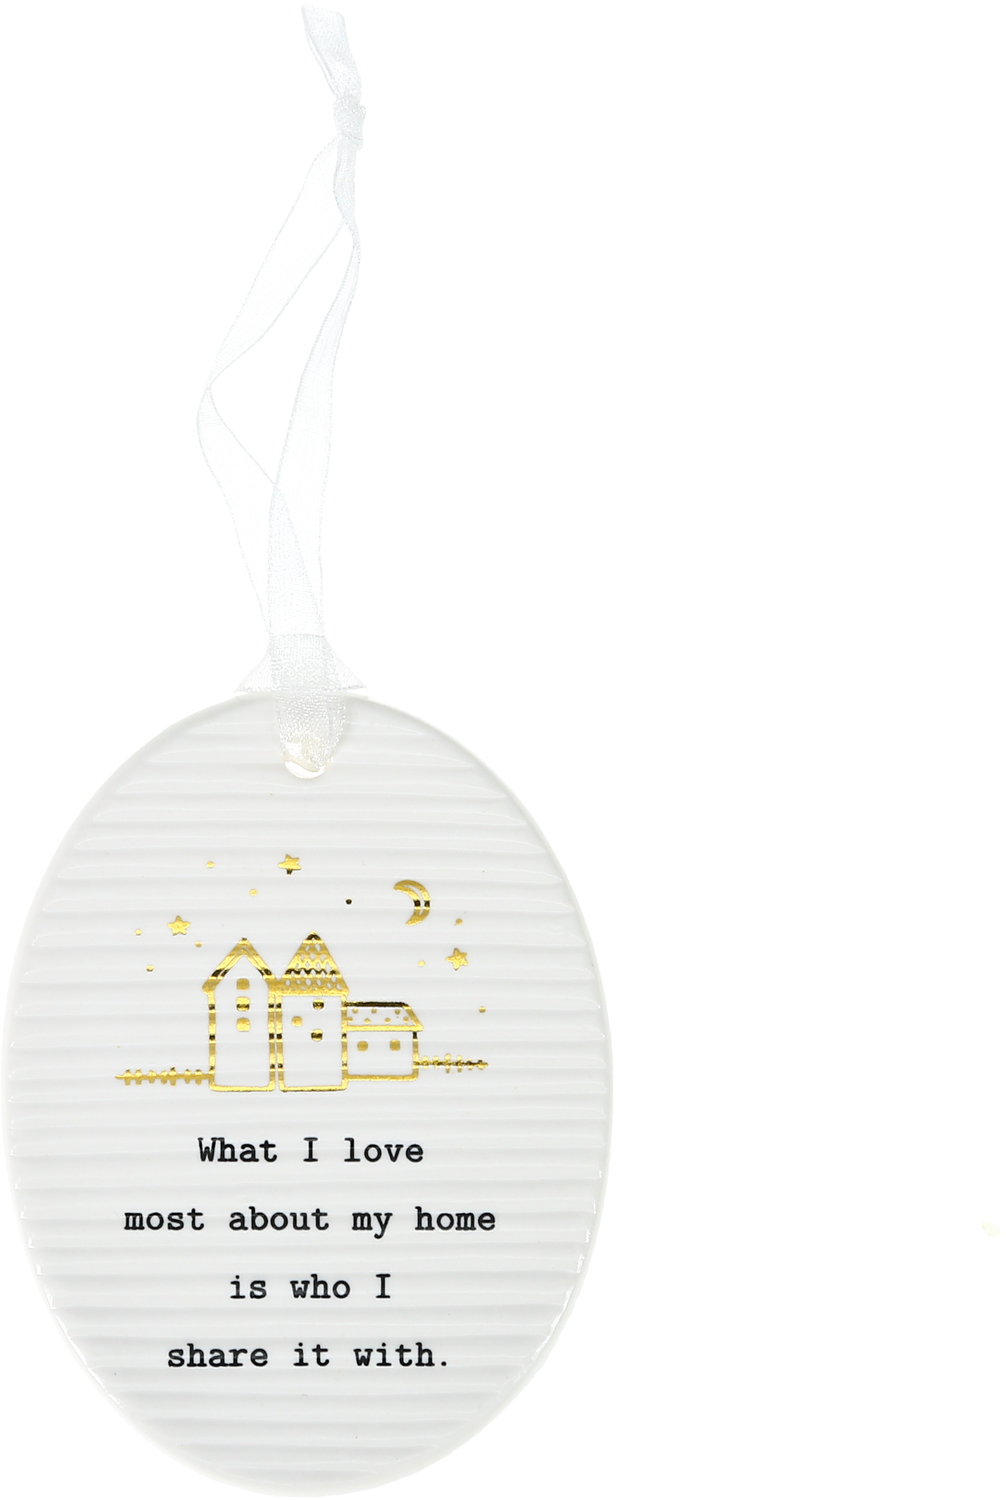 My Home by Thoughtful Words - My Home - 3.5" Hanging Oval Plaque